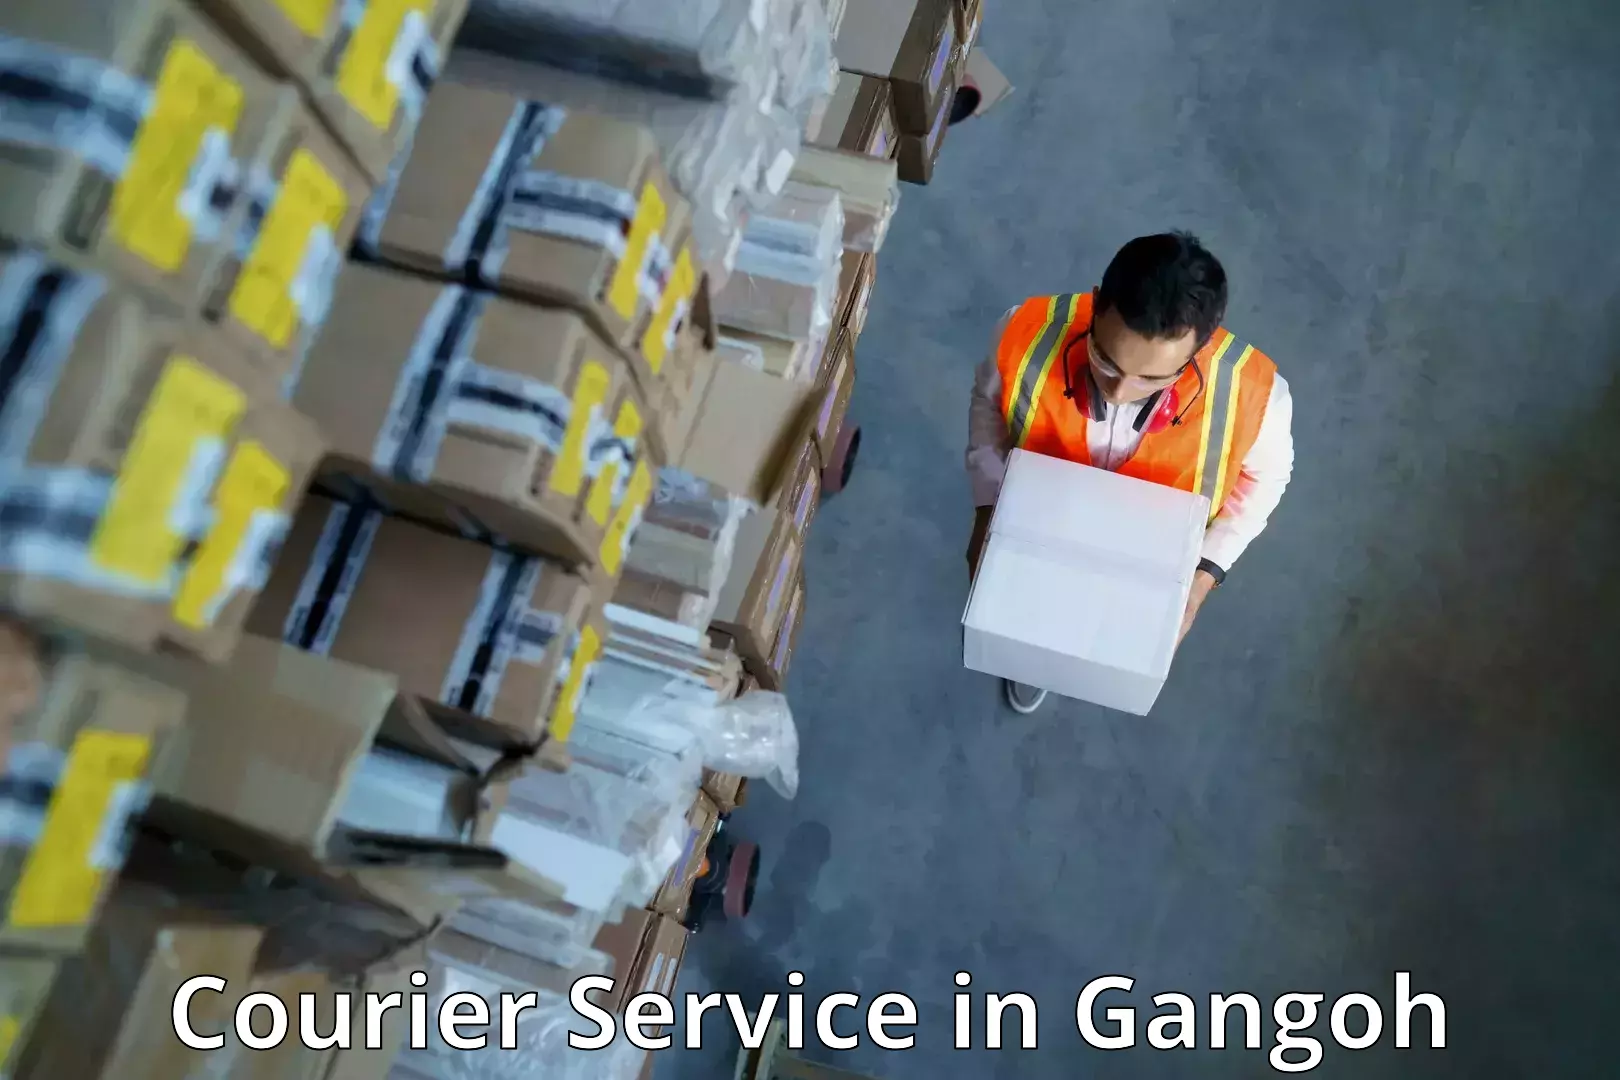 Efficient shipping operations in Gangoh